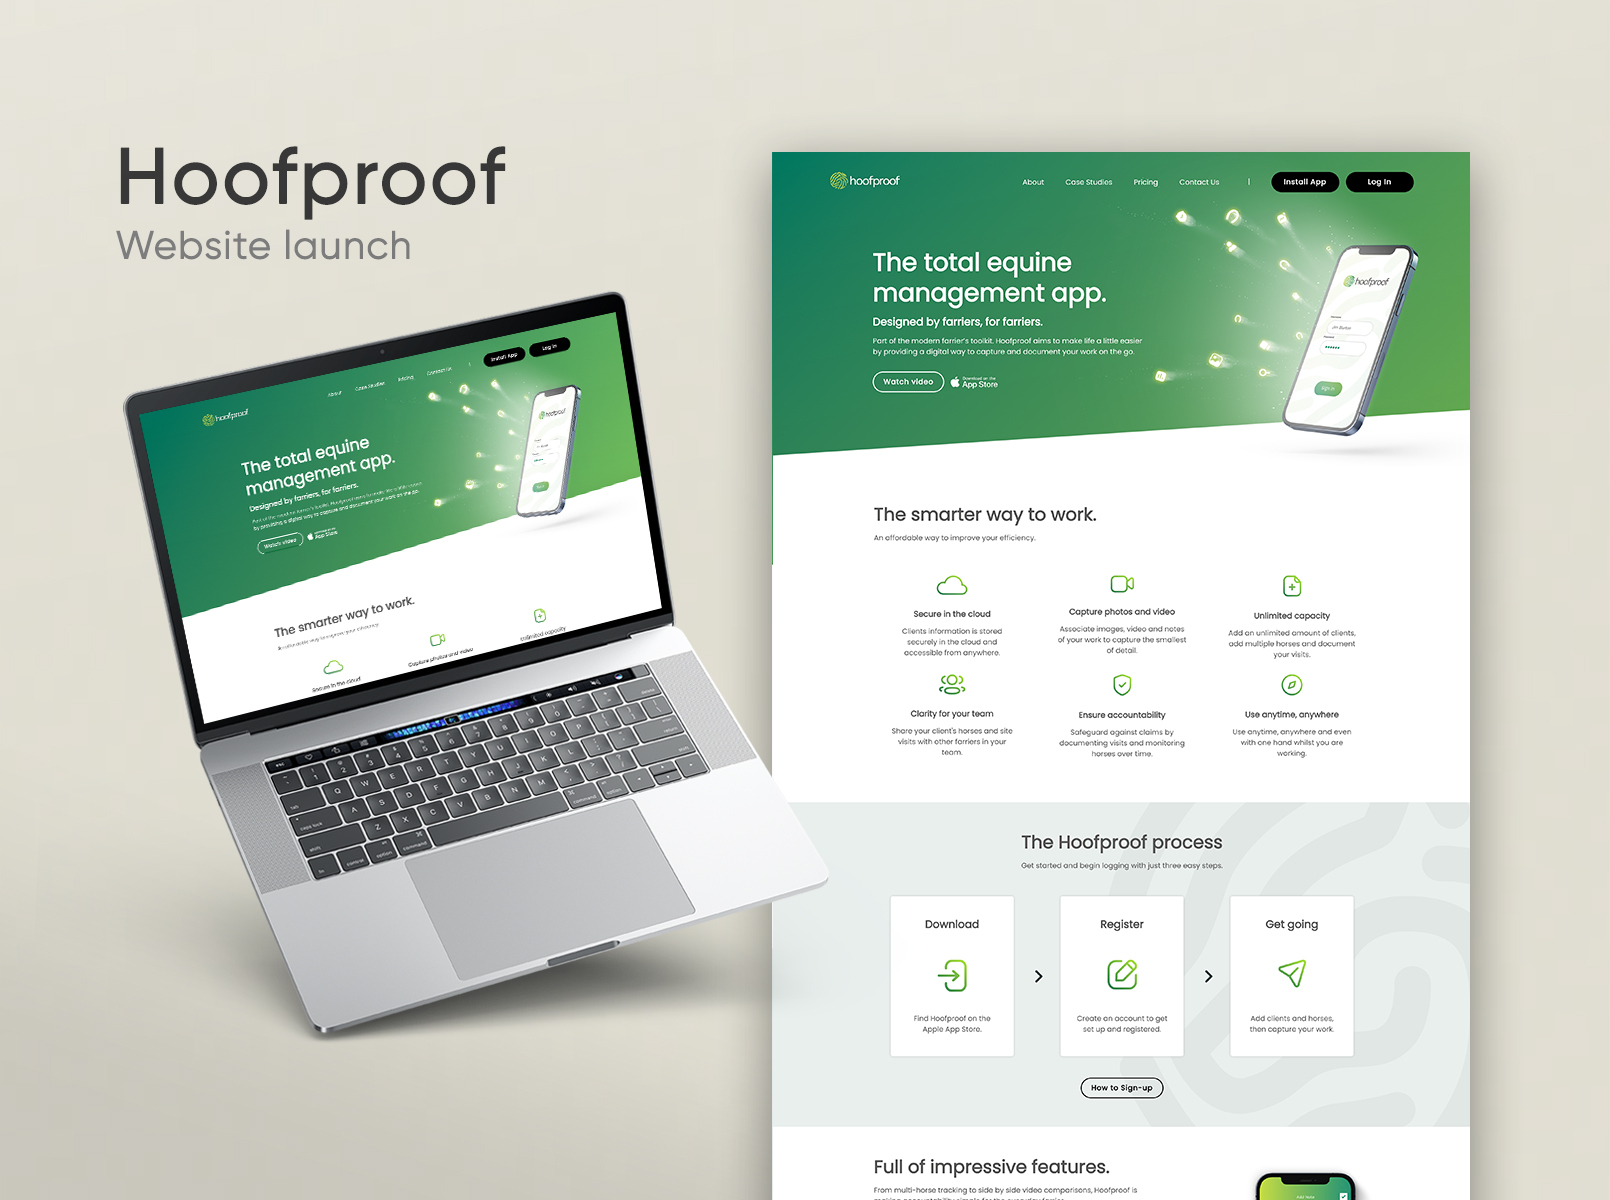 The new and improved Hoofproof website is here!